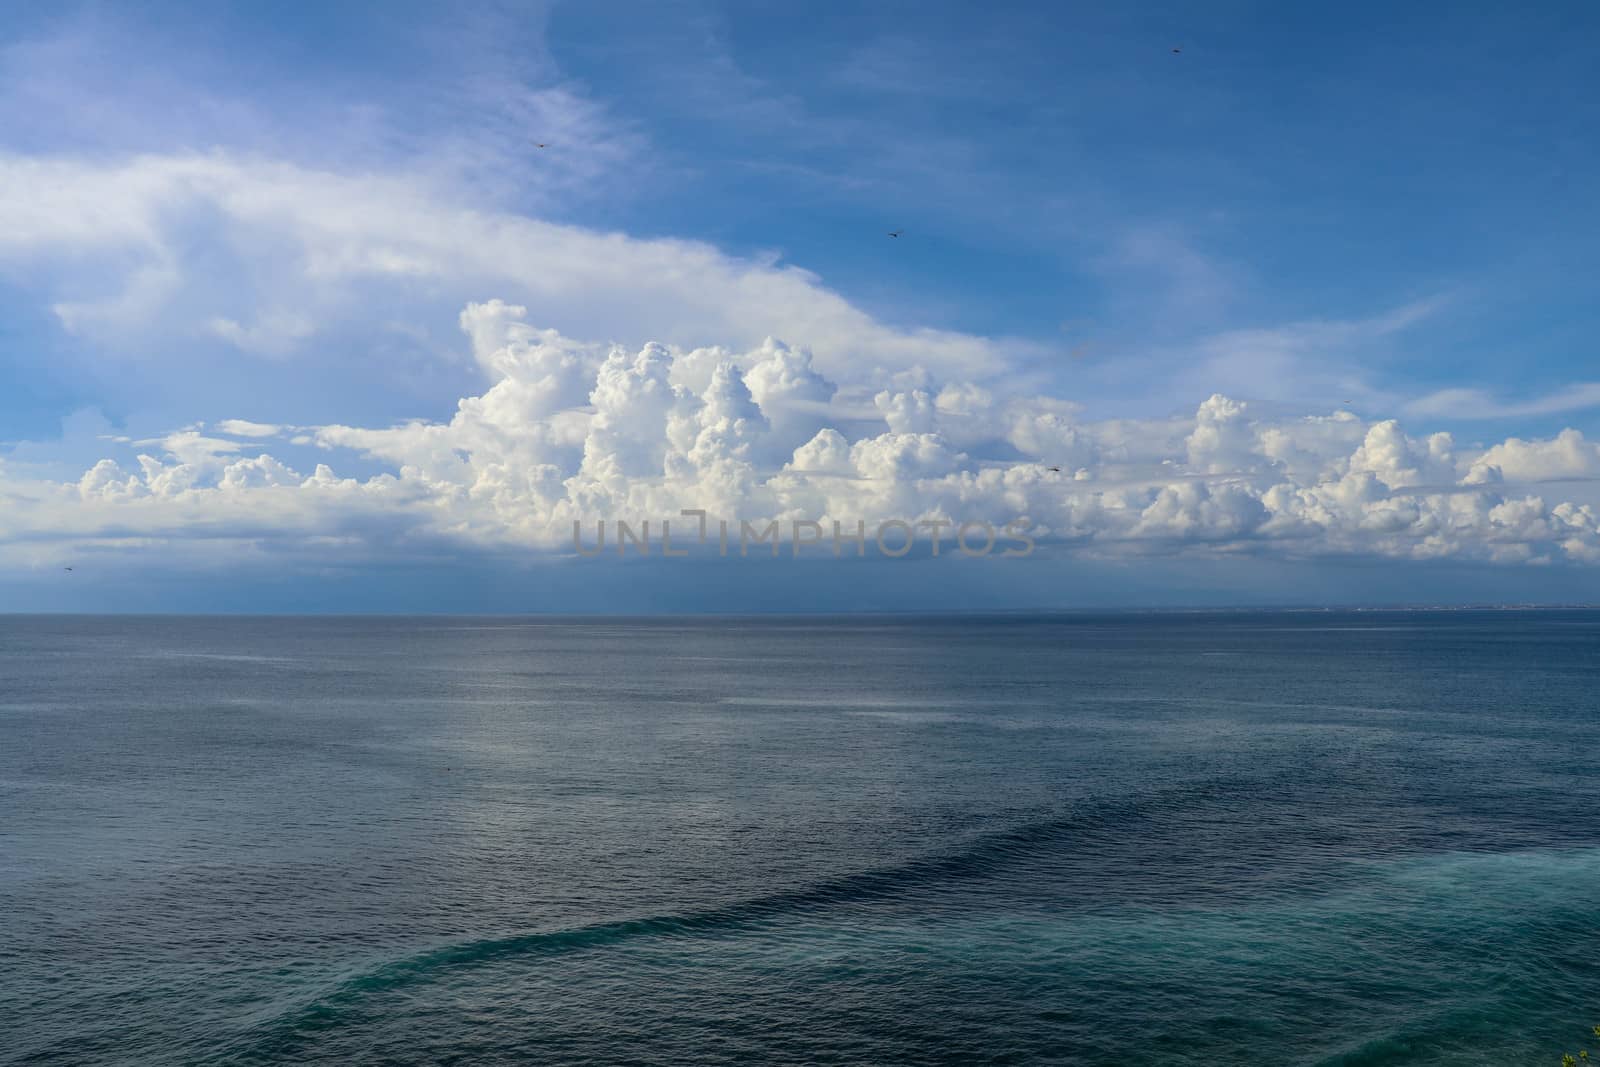 Calm sea and blue sky from the side of a boat with bow wave wake and cumulonimbus clouds on the horizon. by Sanatana2008